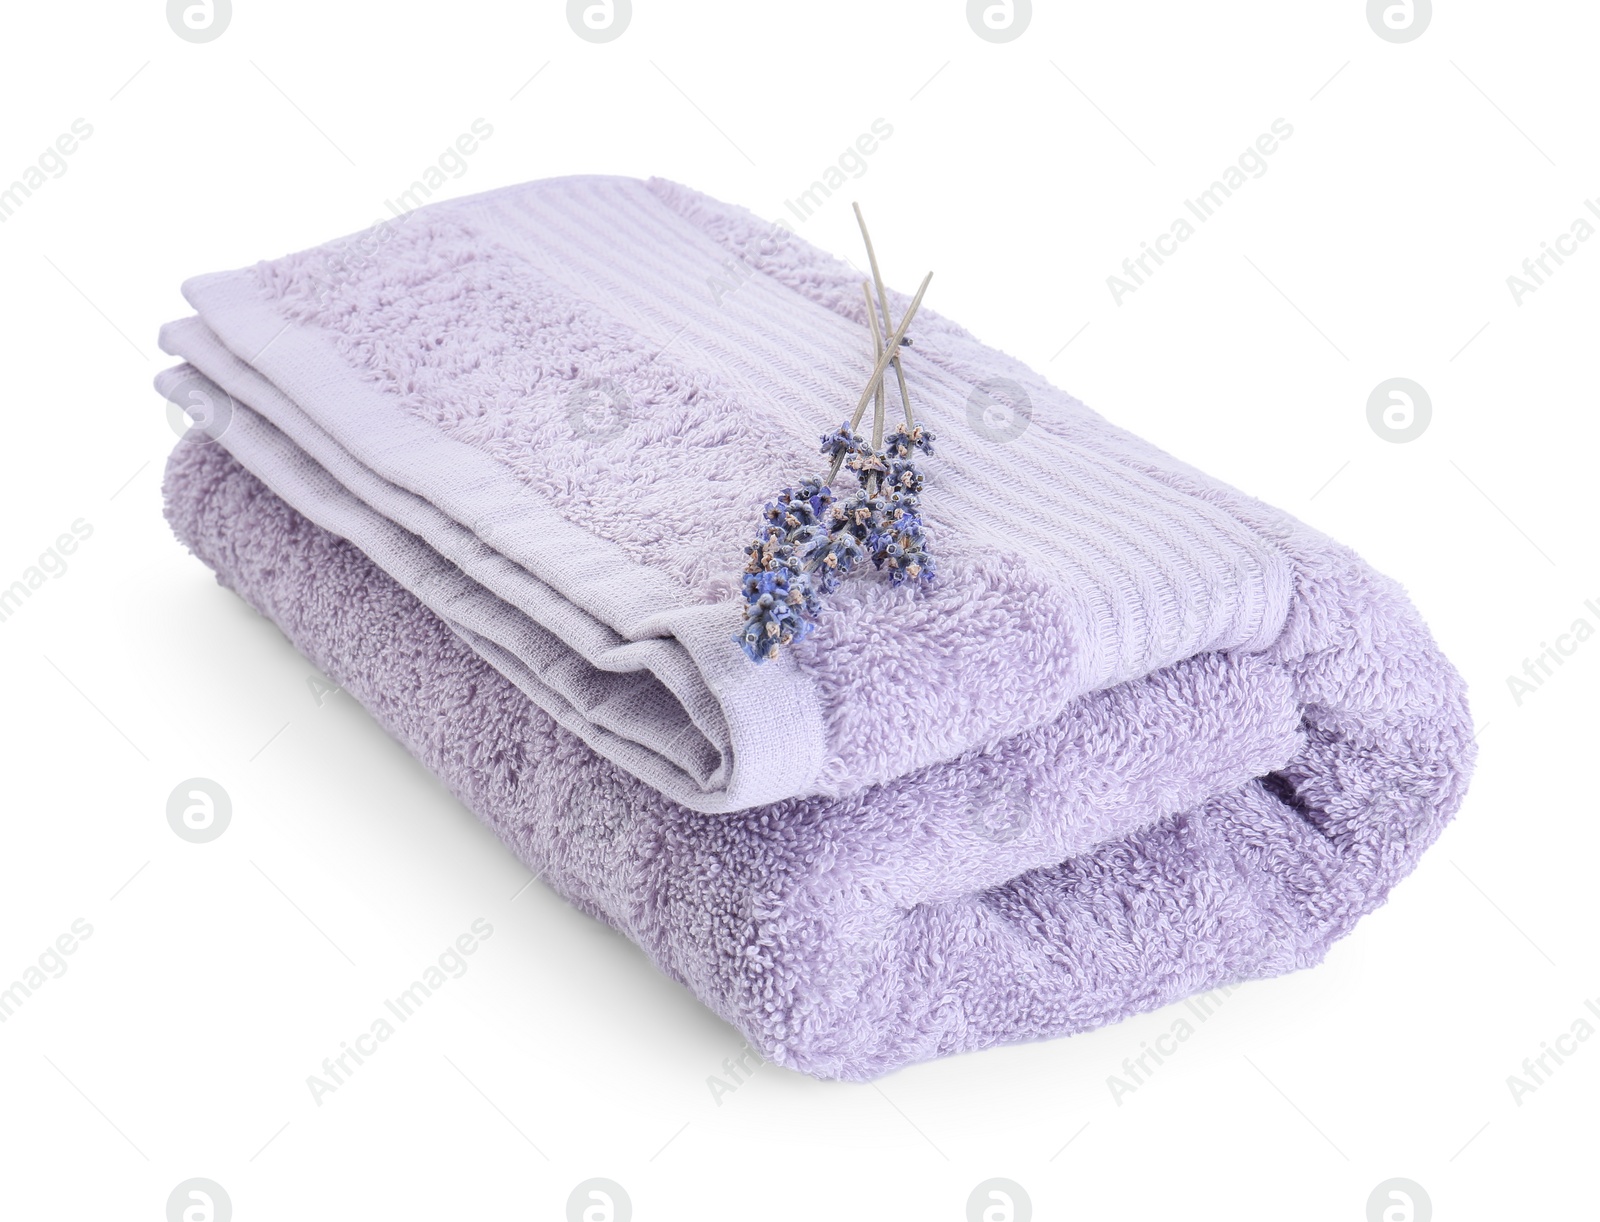 Photo of Folded violet terry towel and dry lavender isolated on white